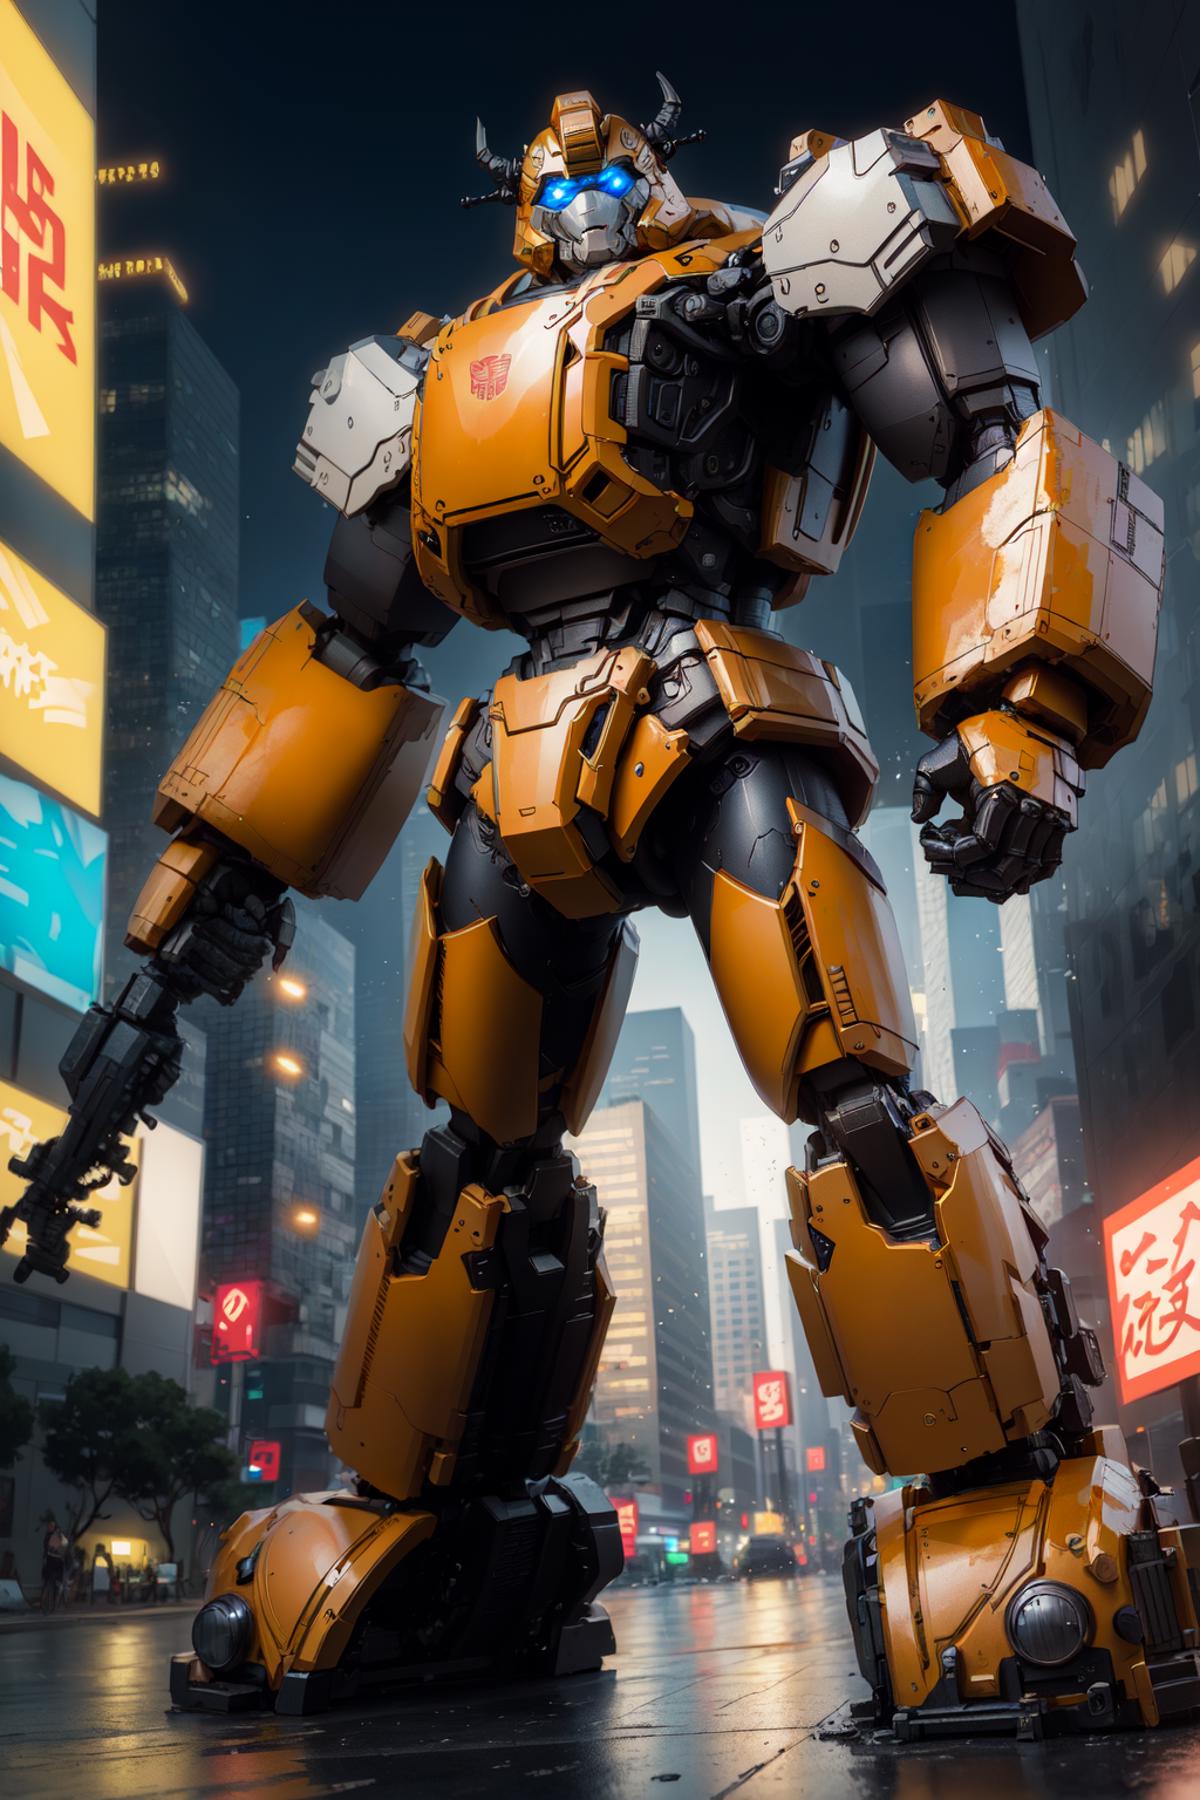 BumbleBee (G1) - Transformers image by SoundWave009